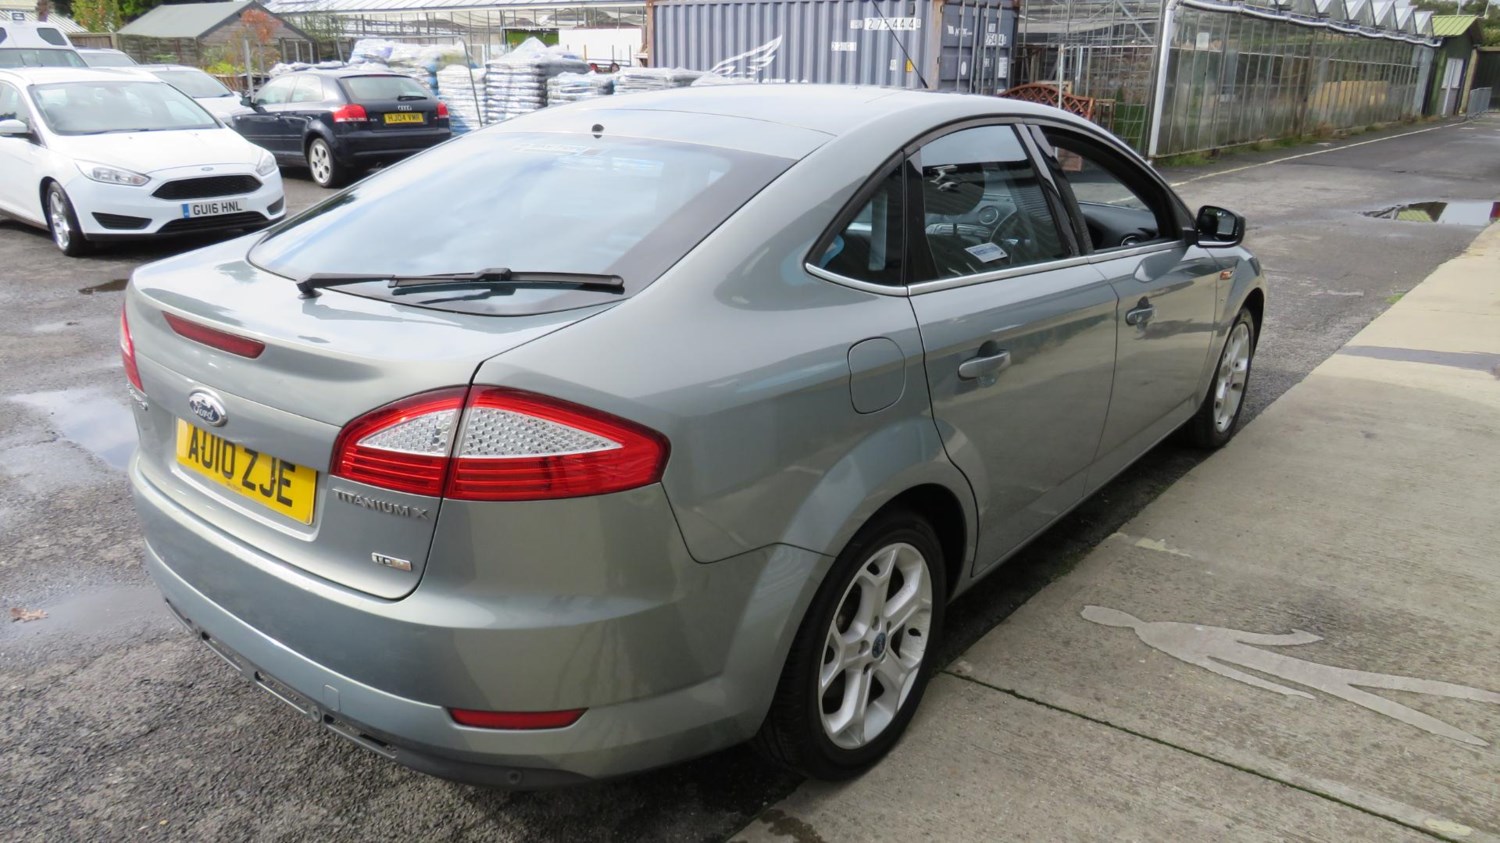 2010 (10) Ford Mondeo 2.0 TDCi TITANIUM X 5 DOOR For Sale In Bashley, Hampshire